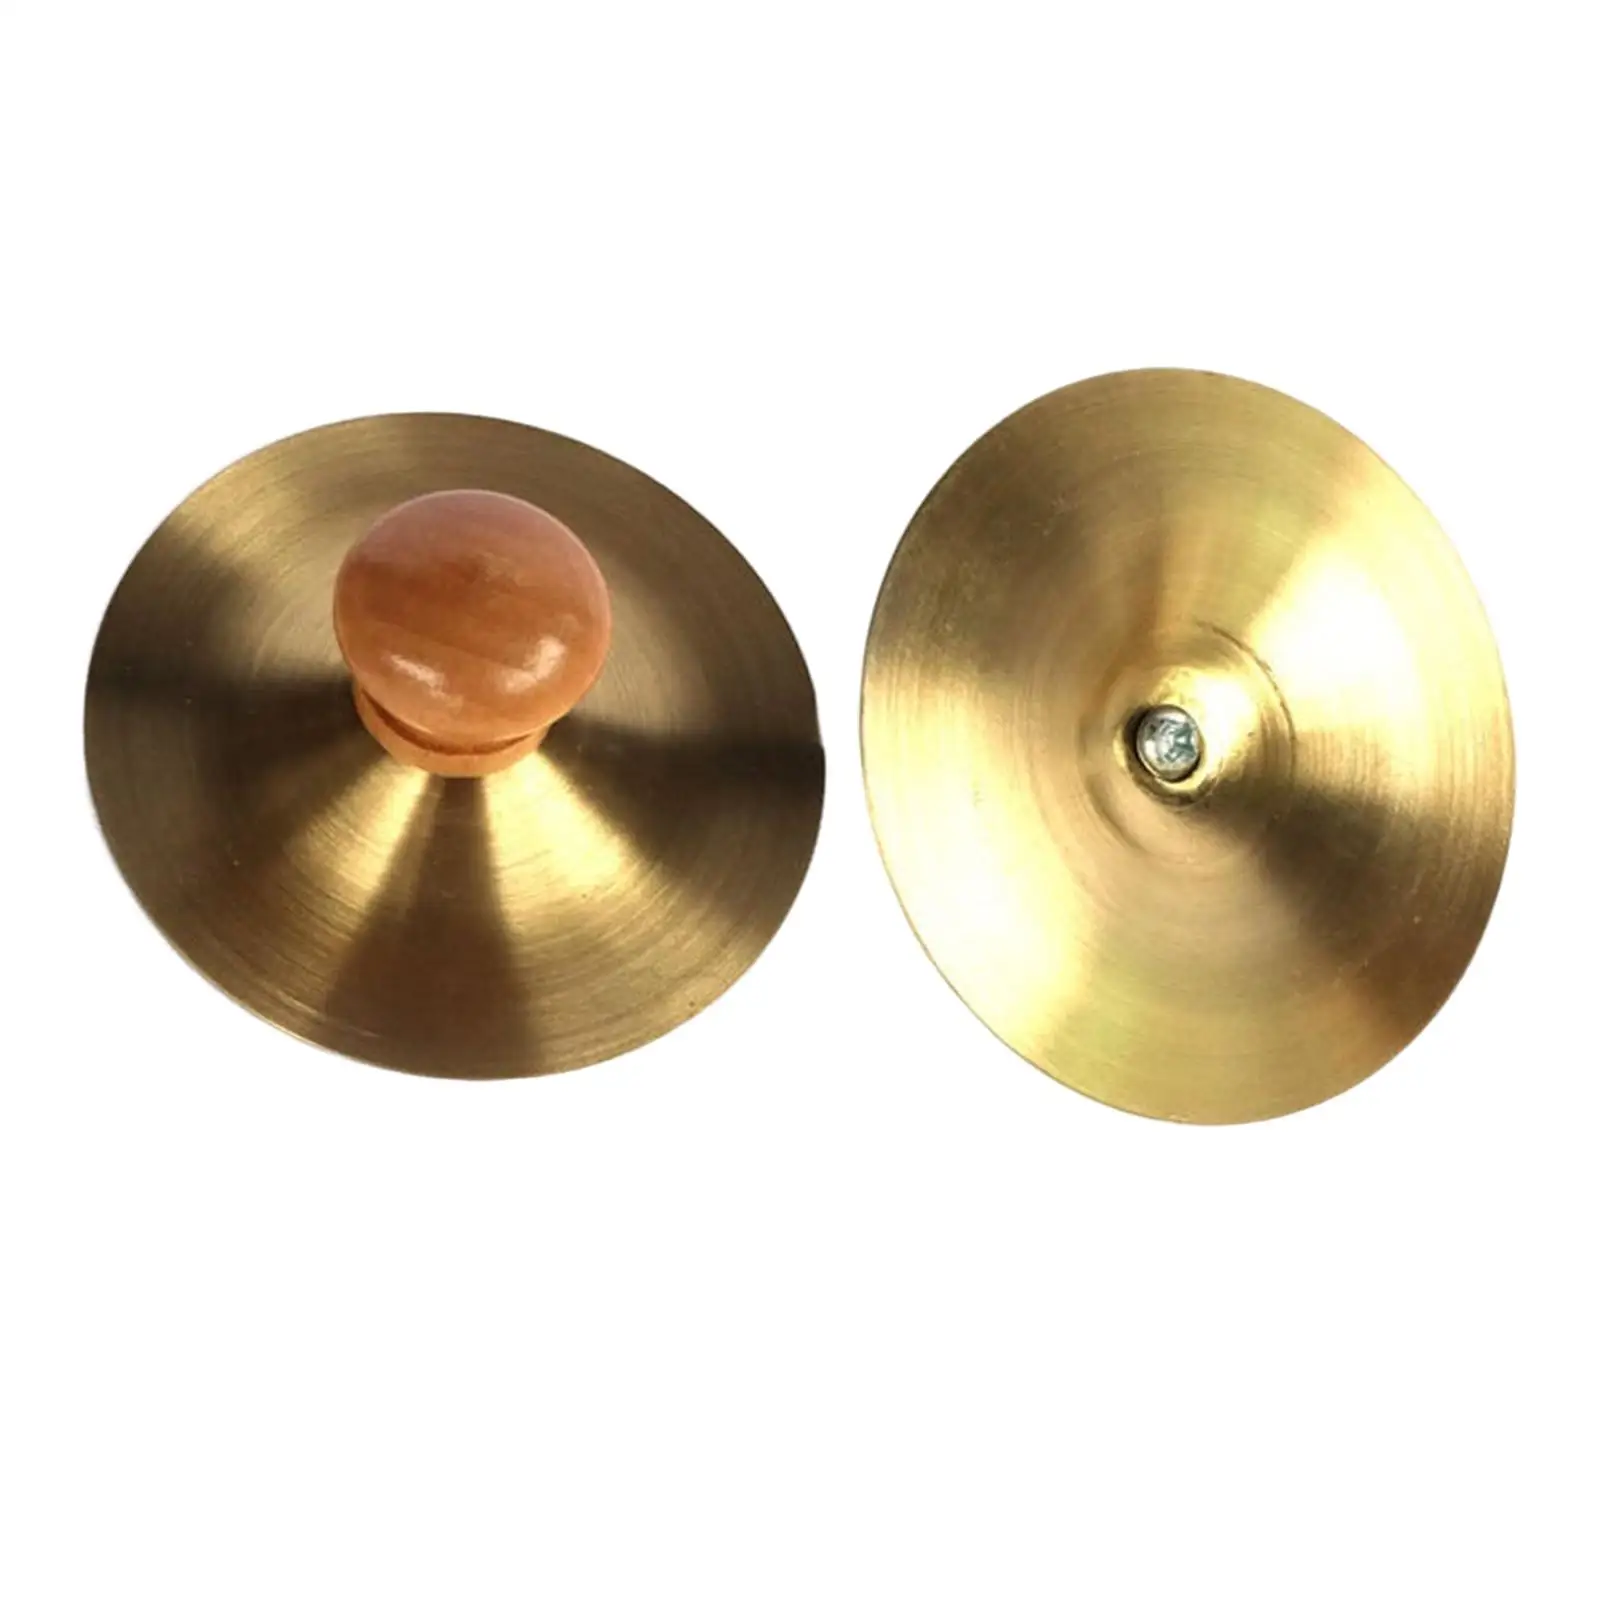 1 Pair Hand Percussion Finger Cymbals Kids Toy Hand Eye Coordination Musical Instrument Copper Hand Cymbals for Children Gifts